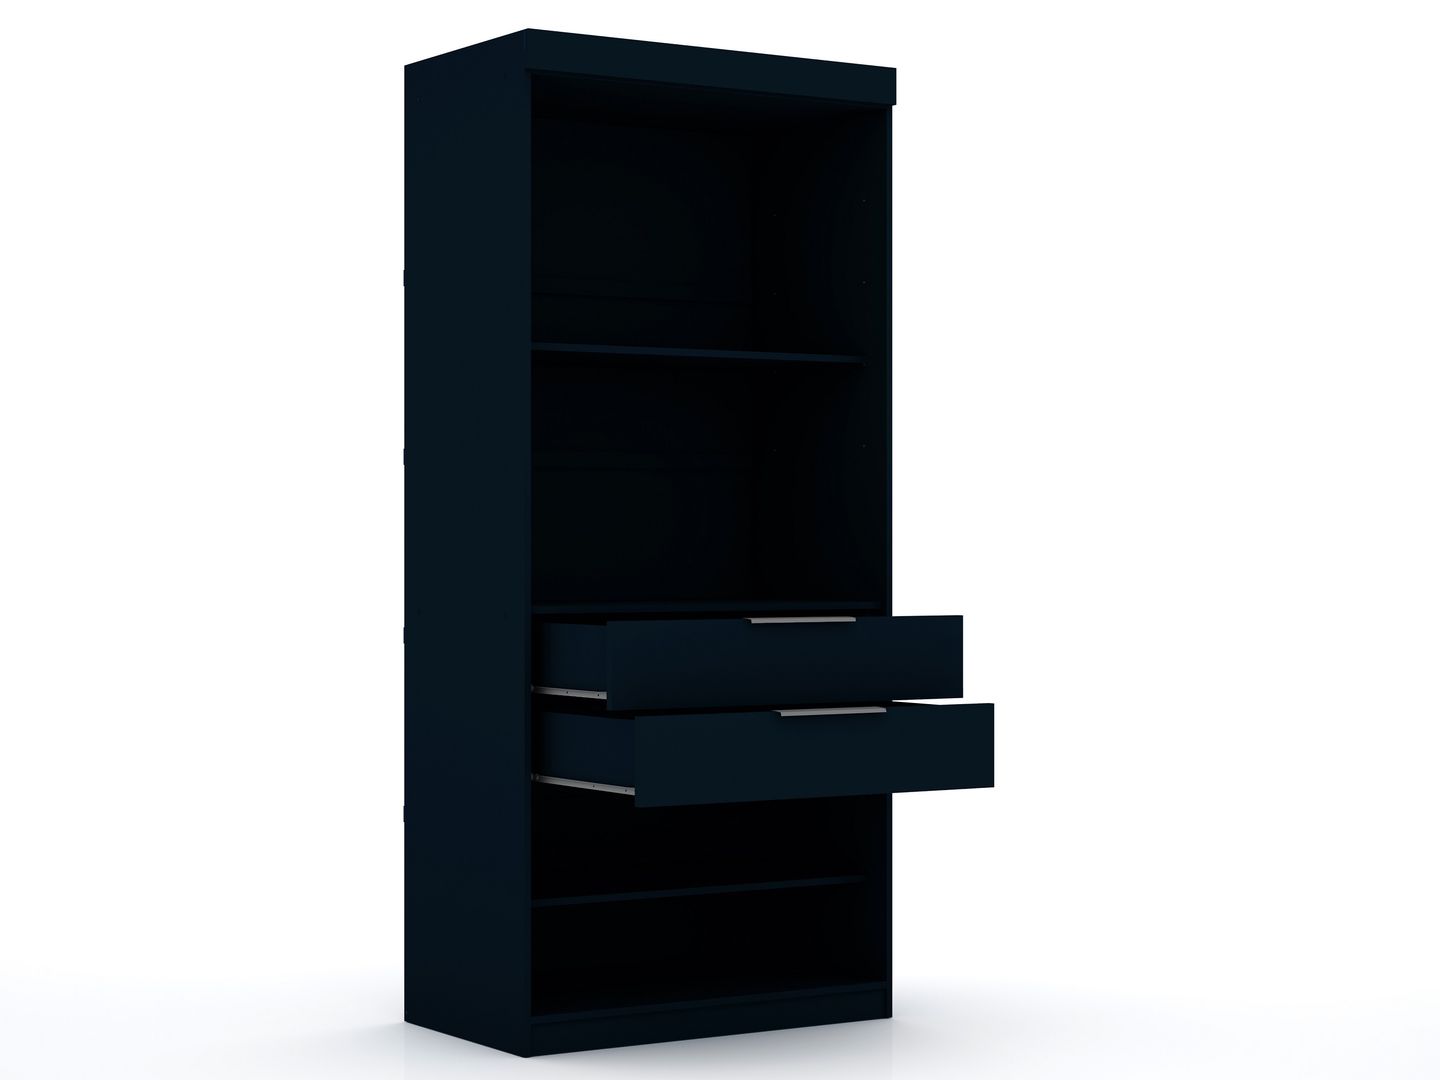 Manhattan Comfort Mulberry Open 2 Sectional Modern Wardrobe Closet with 4 Drawers - Set of 2 in Tatiana Midnight Blue